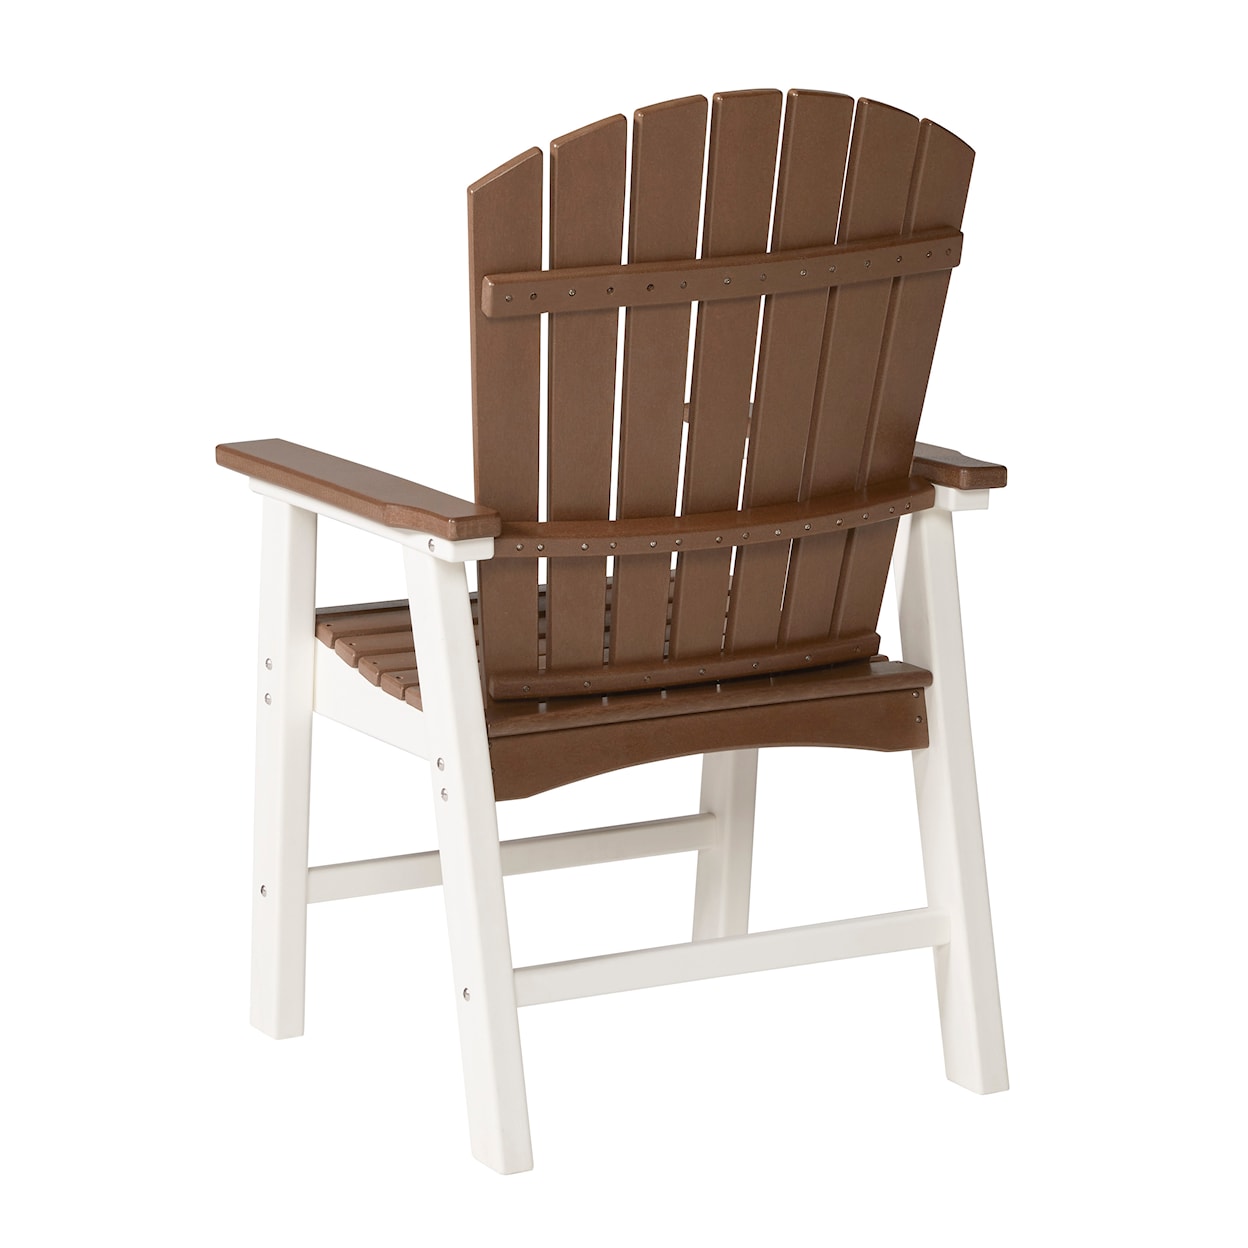 Benchcraft Genesis Bay Outdoor Dining Arm Chair (Set of 2)